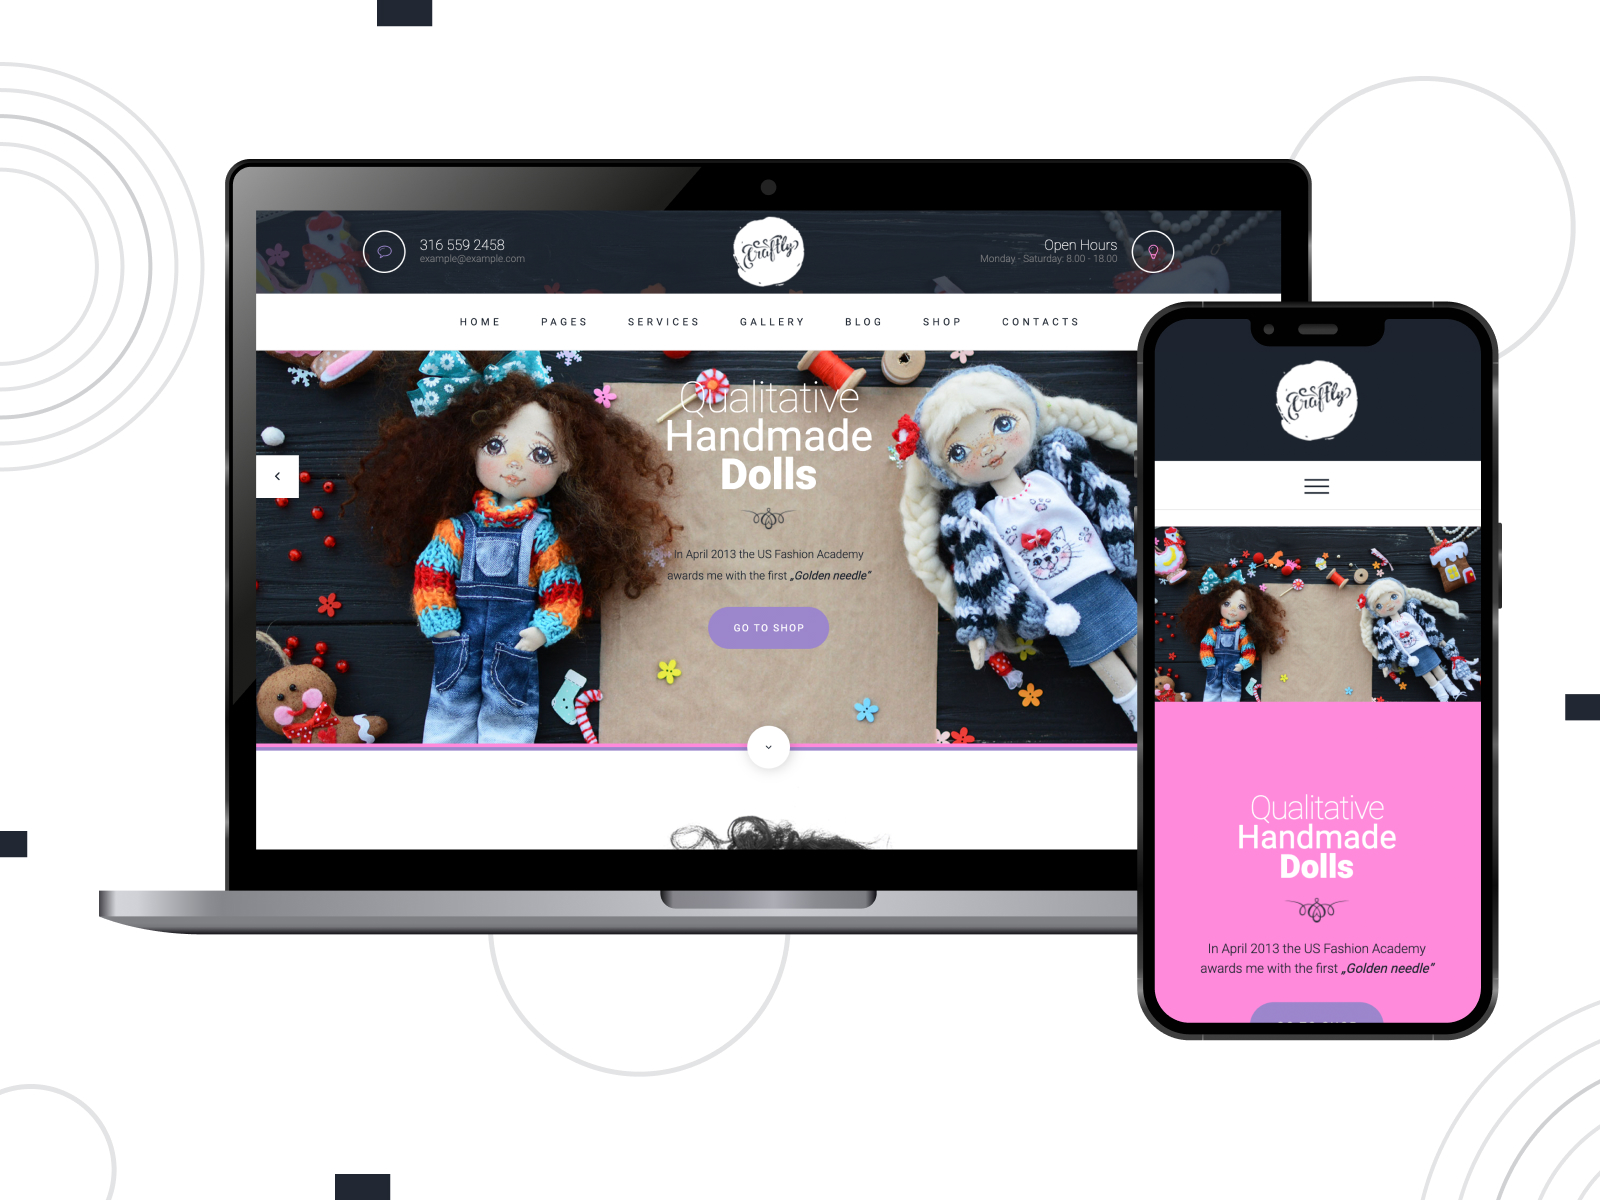 Graphic of Craftly, a secure WordPress theme for handmade stores with social integration in blueviolet, white, and black hue arrangement.